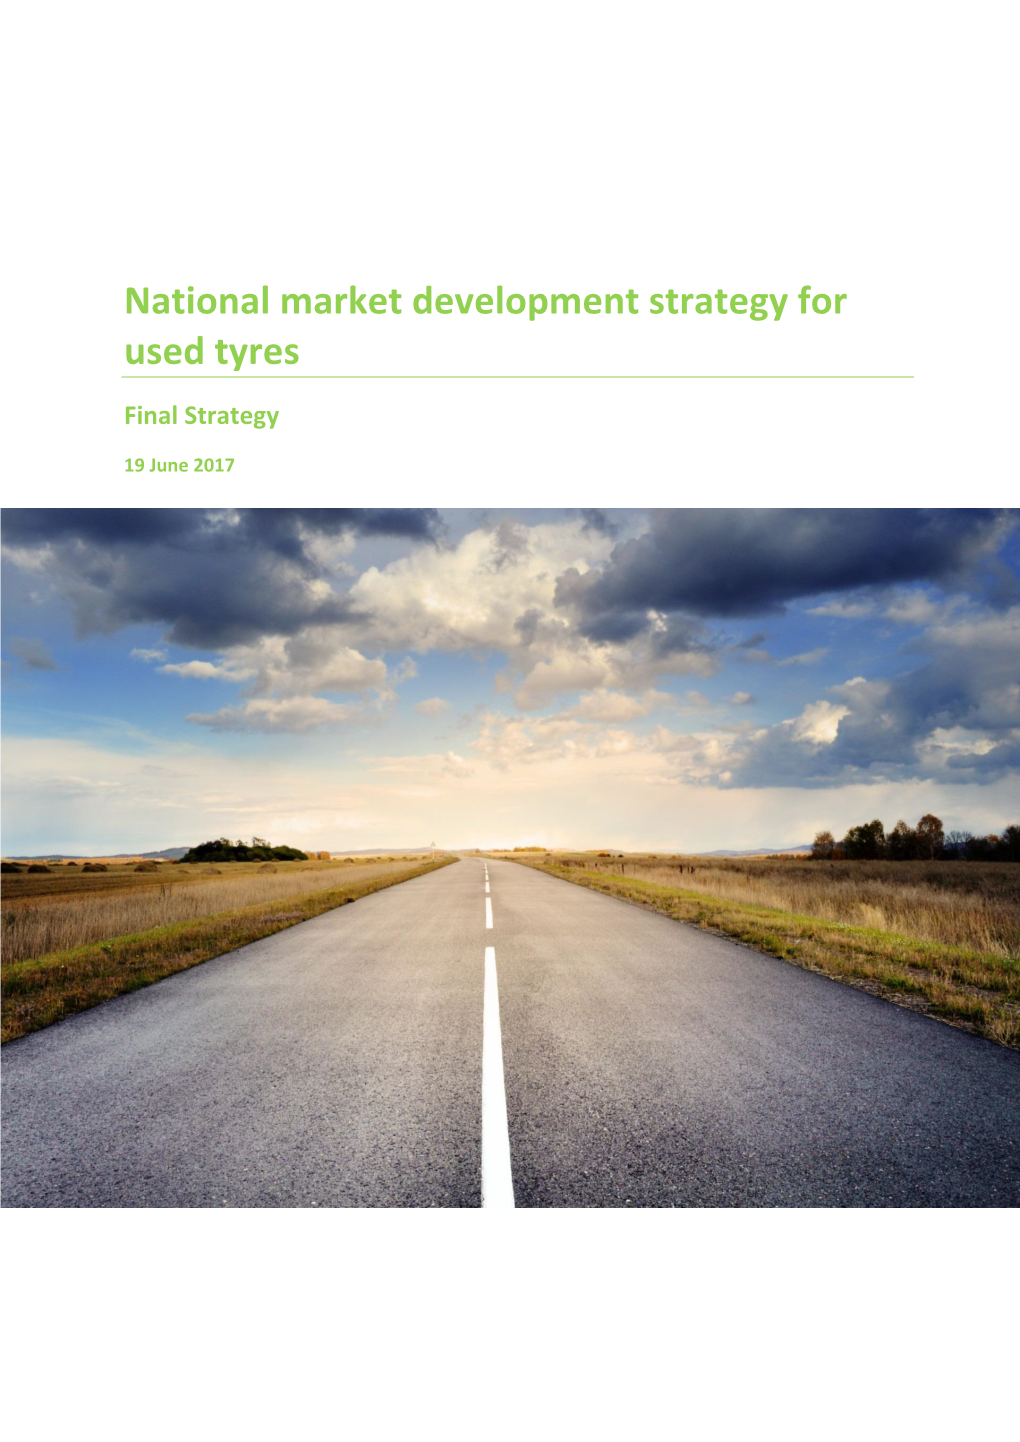 National Market Development Strategy for Used Tyres